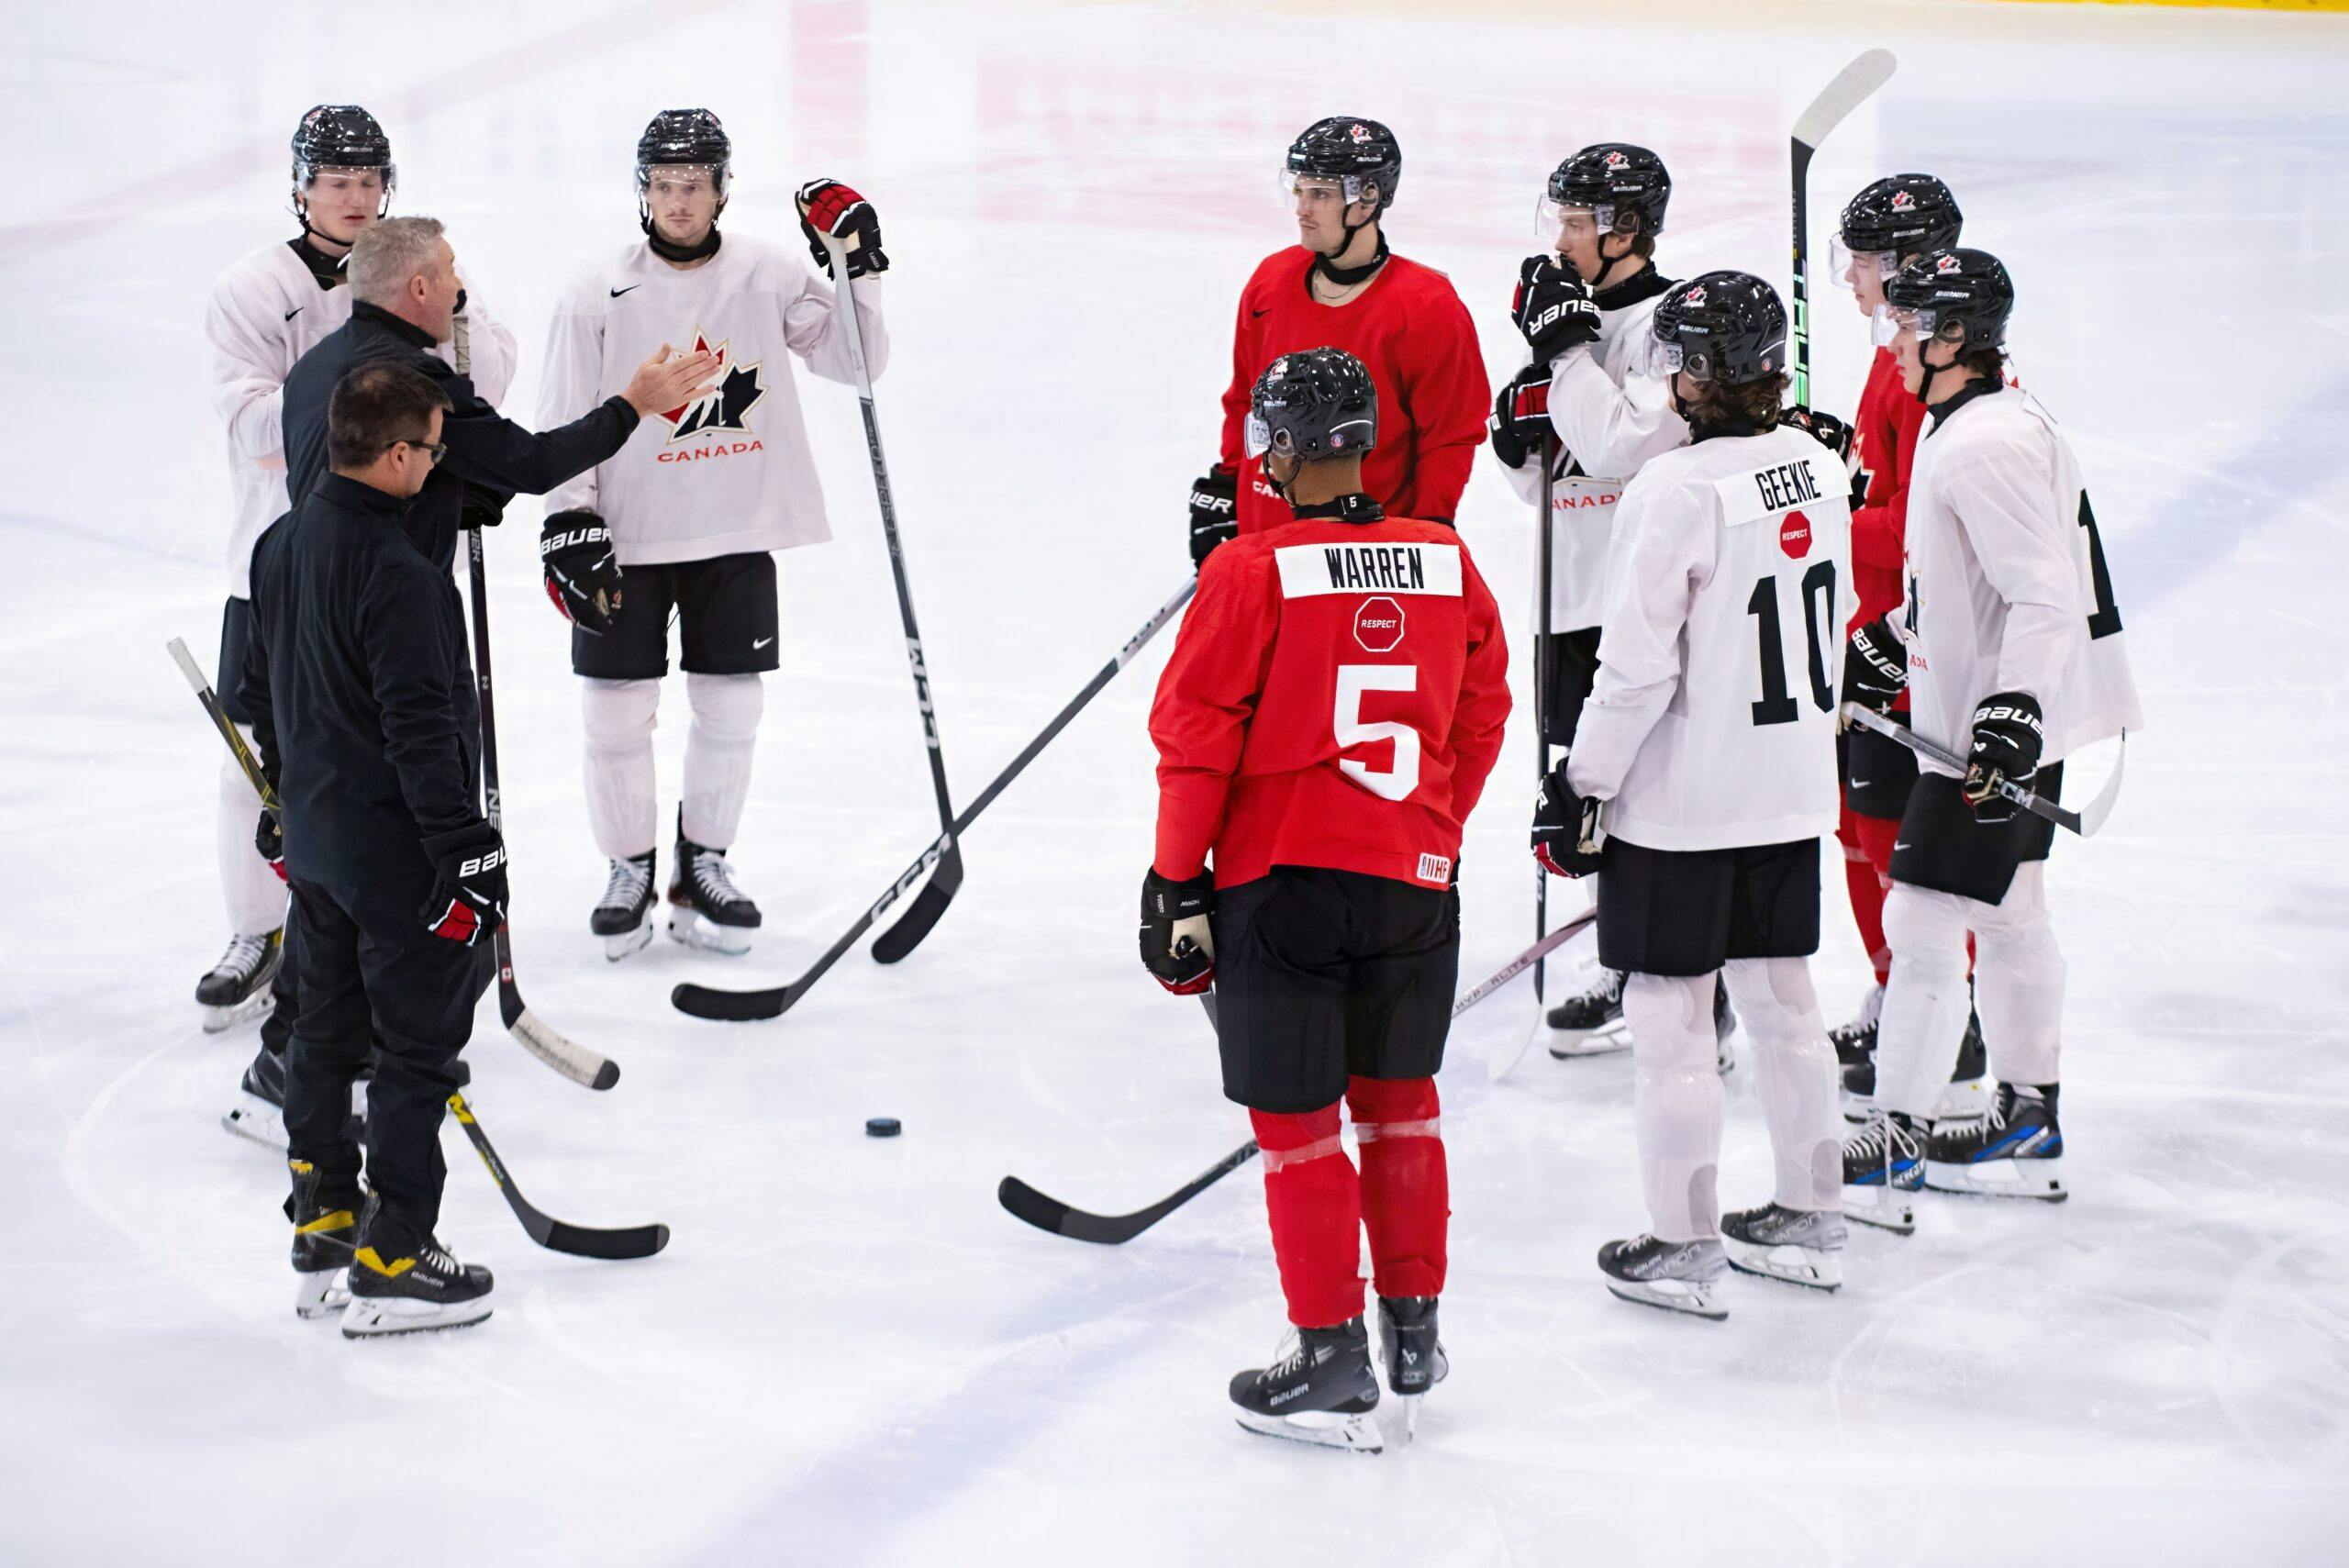 If Canada is going to win world junior gold, the stars need to be much better